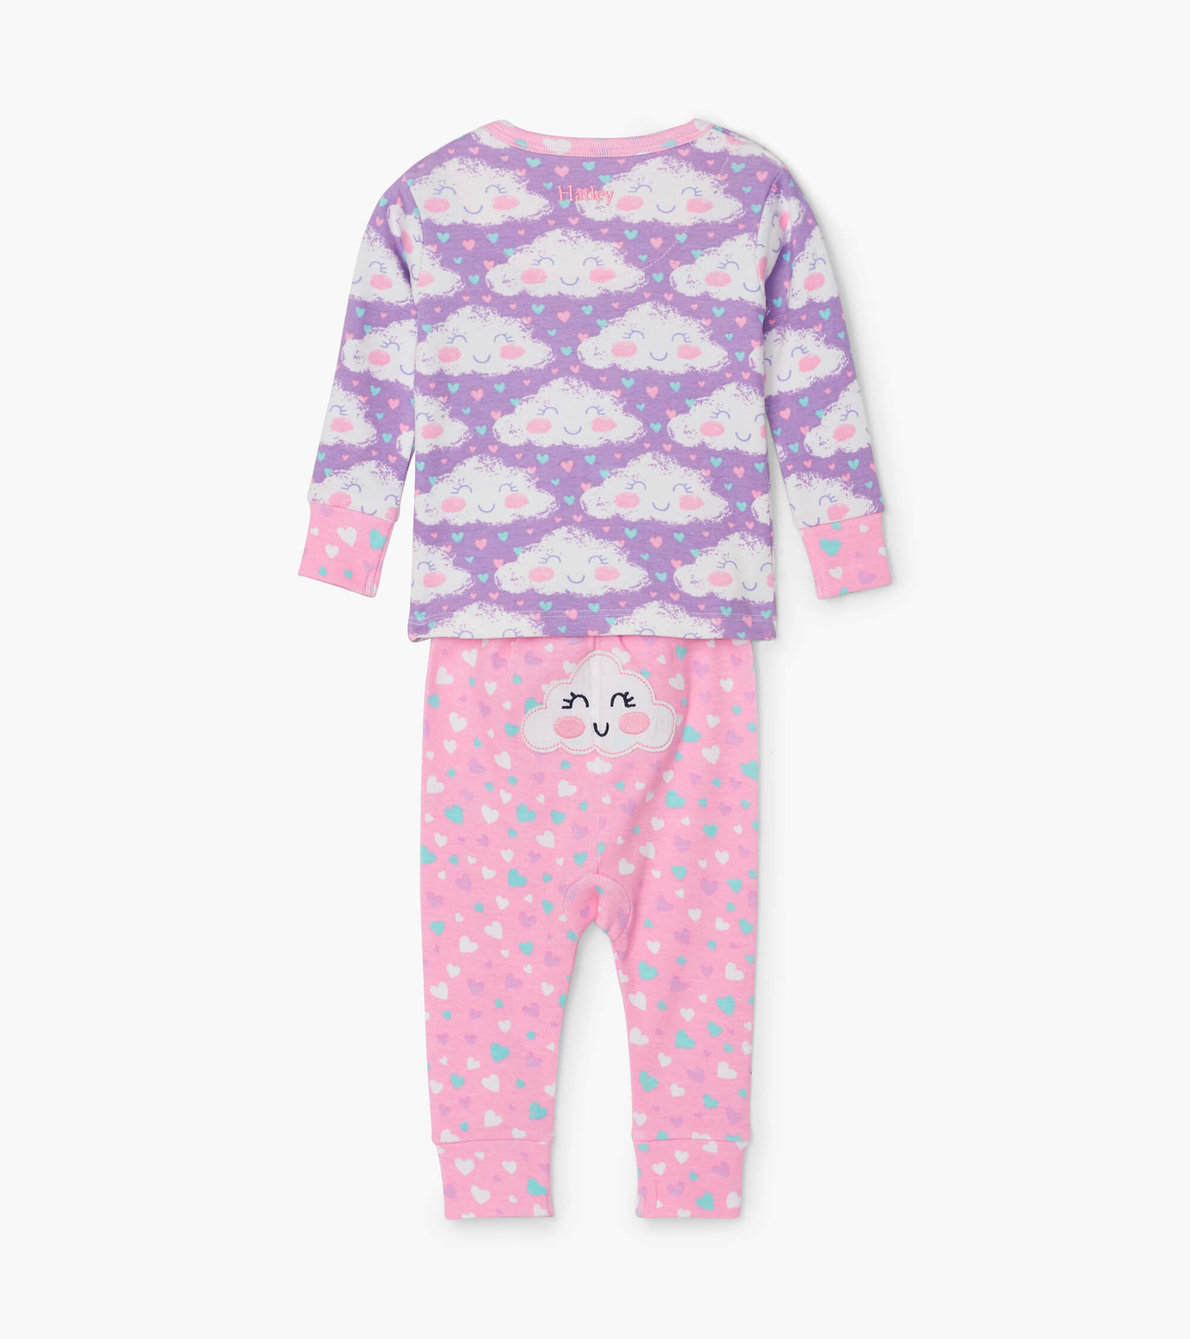 View larger image of Cheerful Clouds Organic Cotton Baby Pajama Set